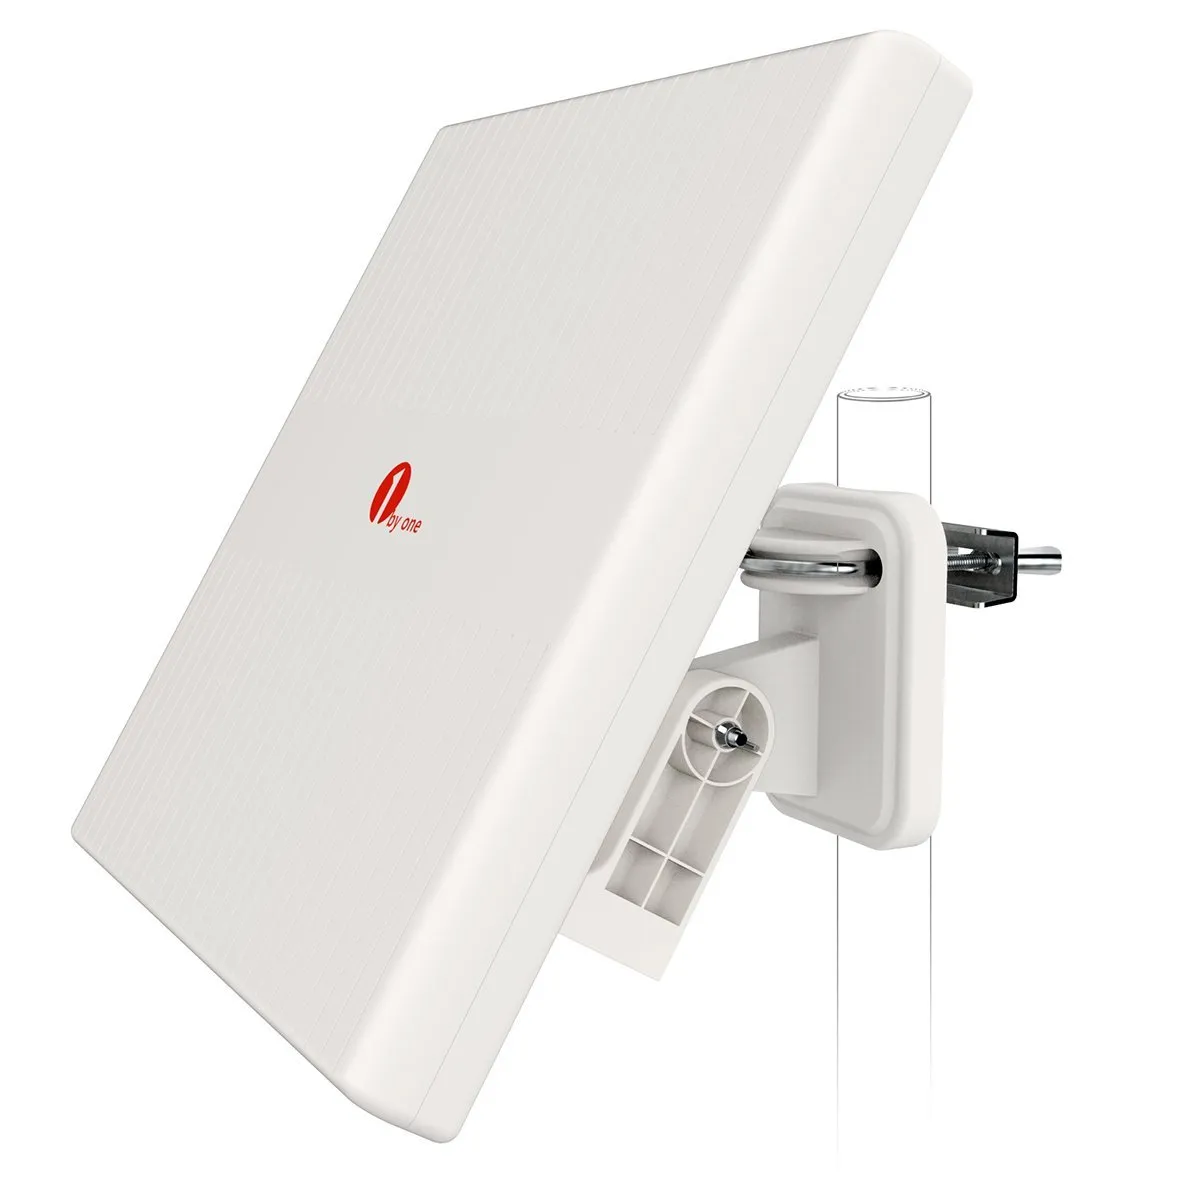 1byone-omni-directional-outdoor-antenna